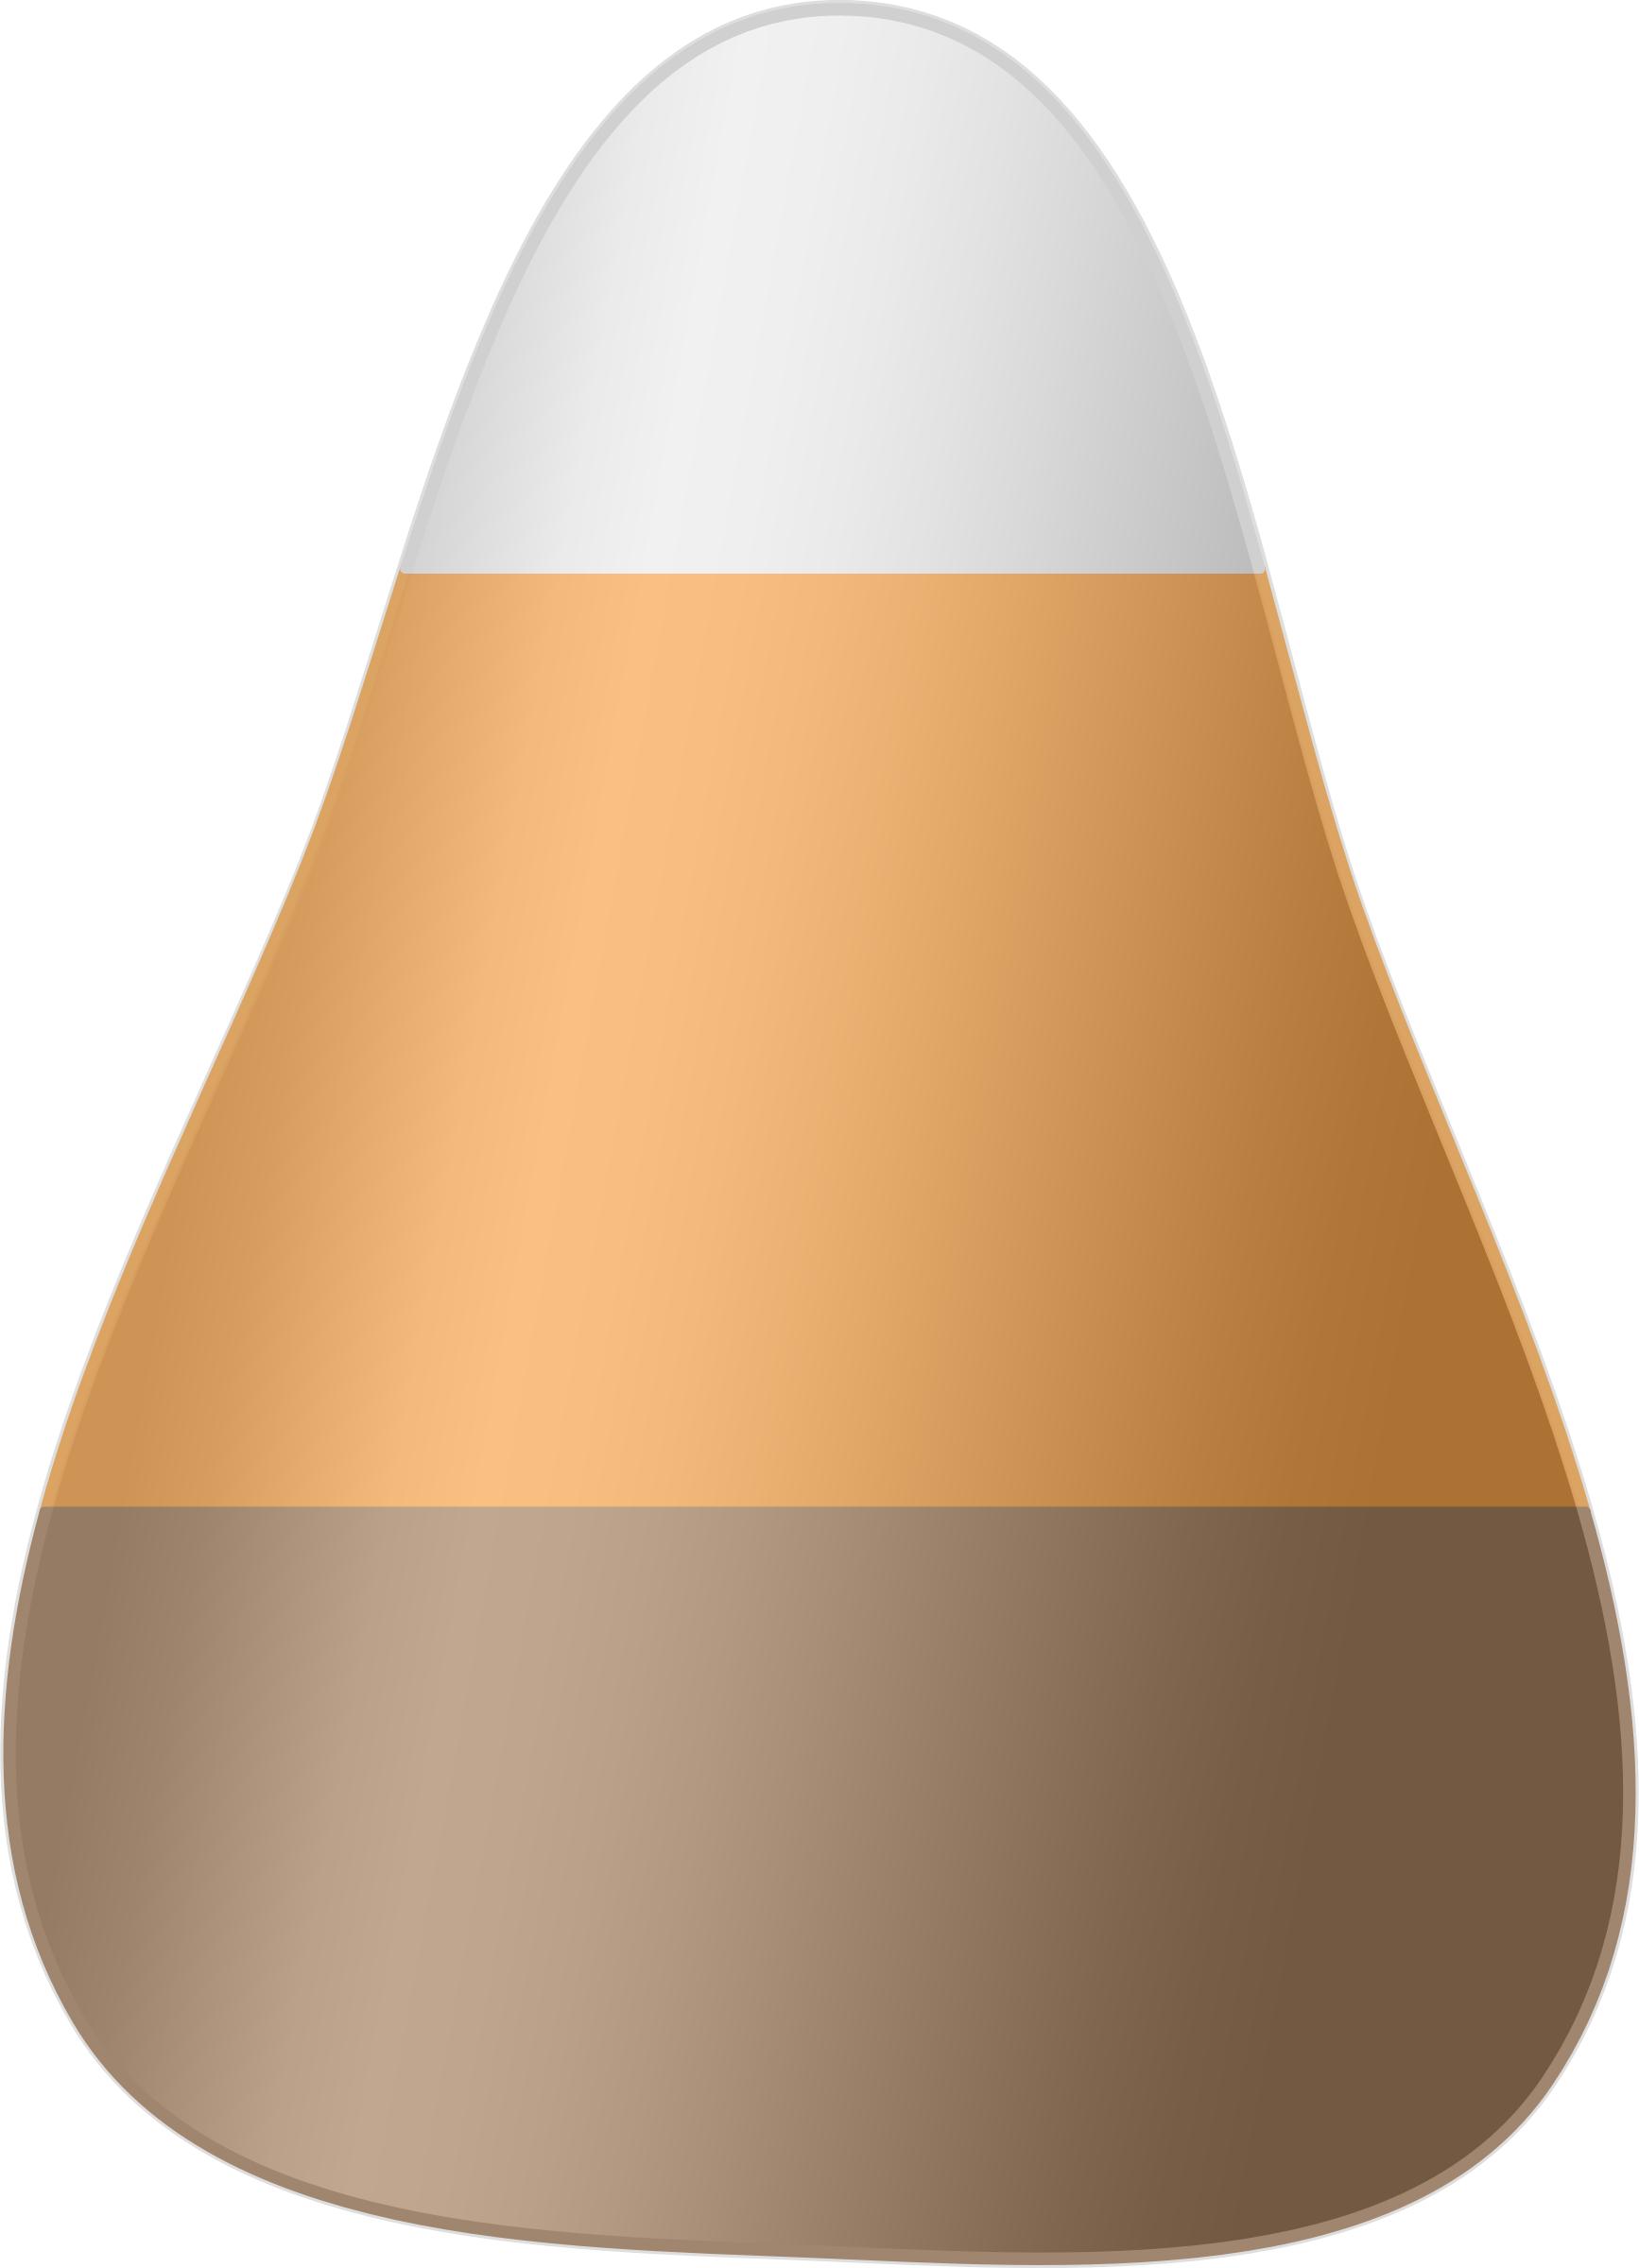 Candy Corn 03 png